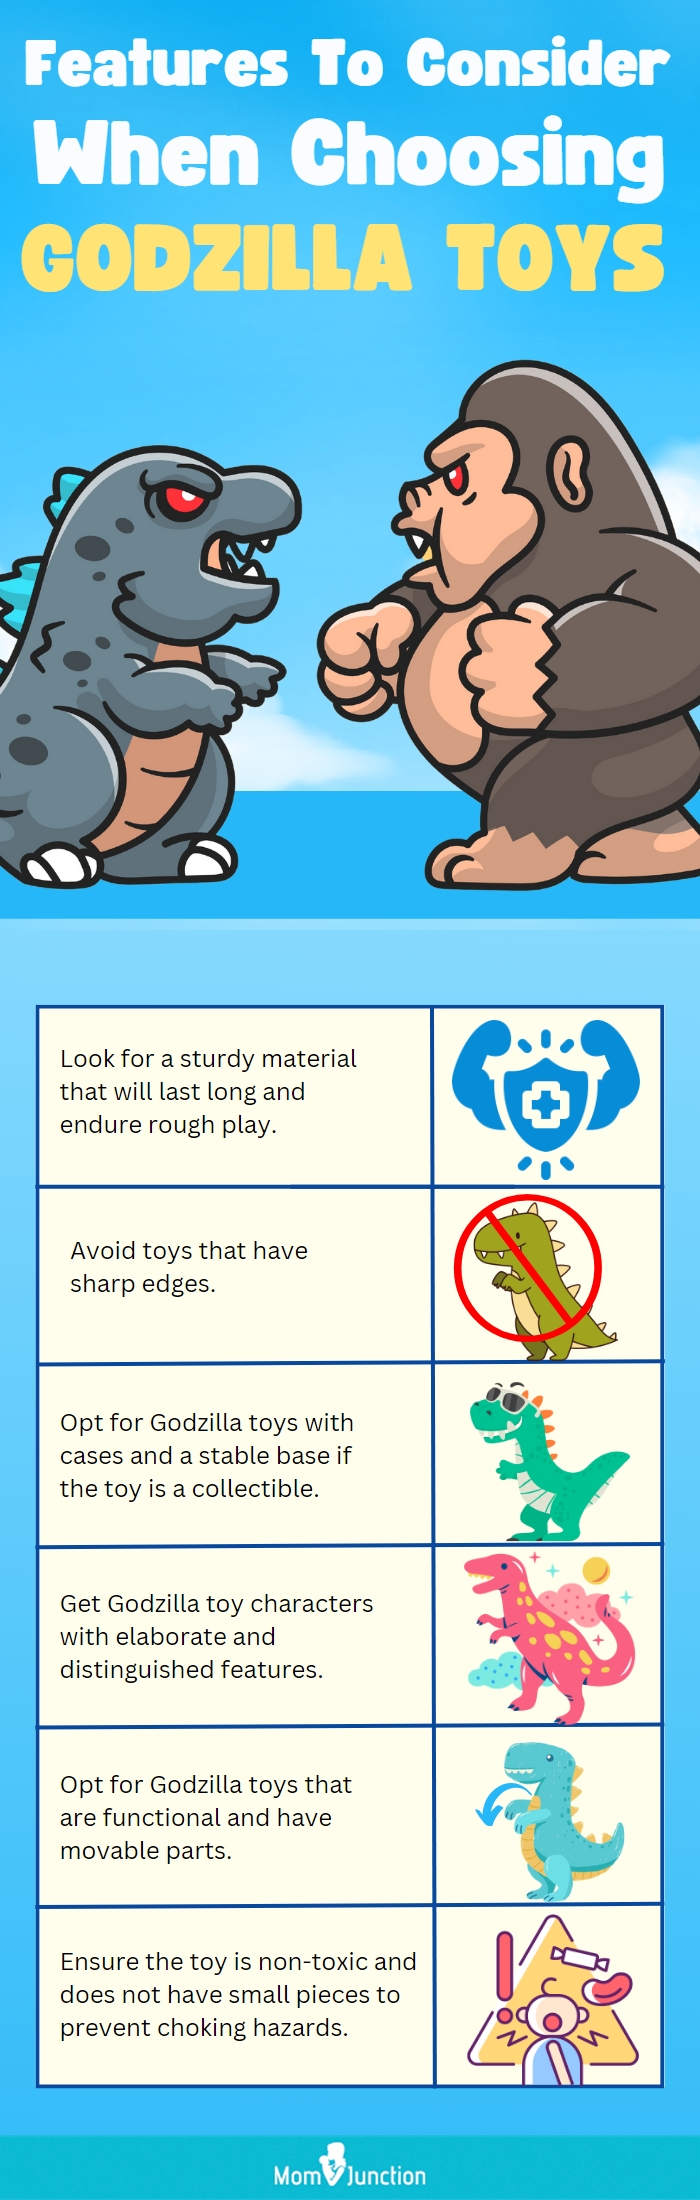 Features To Consider When Choosing Godzilla Toys (Infographic)